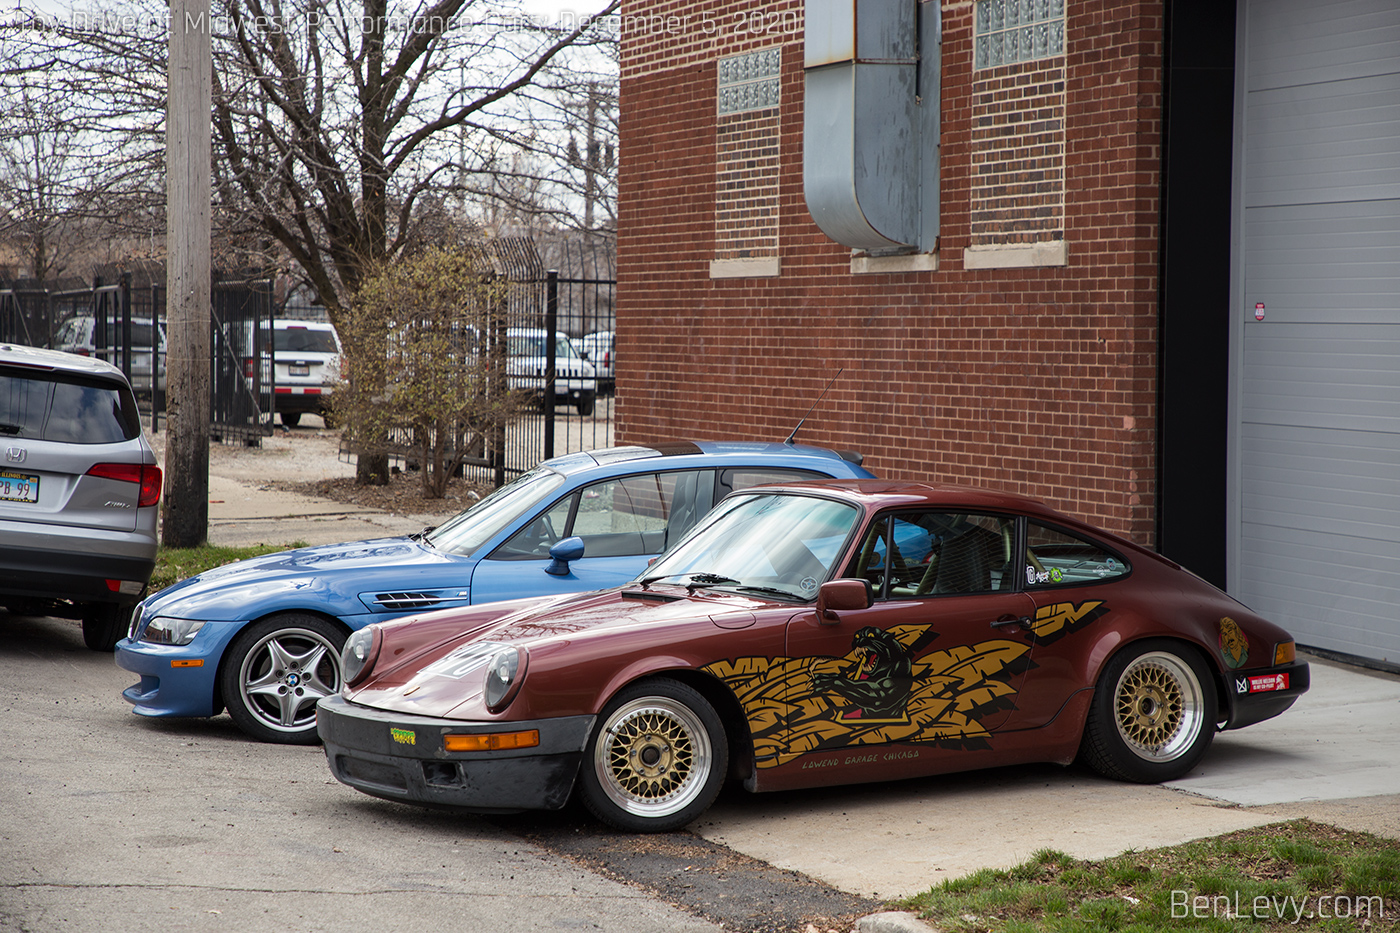 BMW M Coupe and Porsche 911 outside of MPC in Chicago